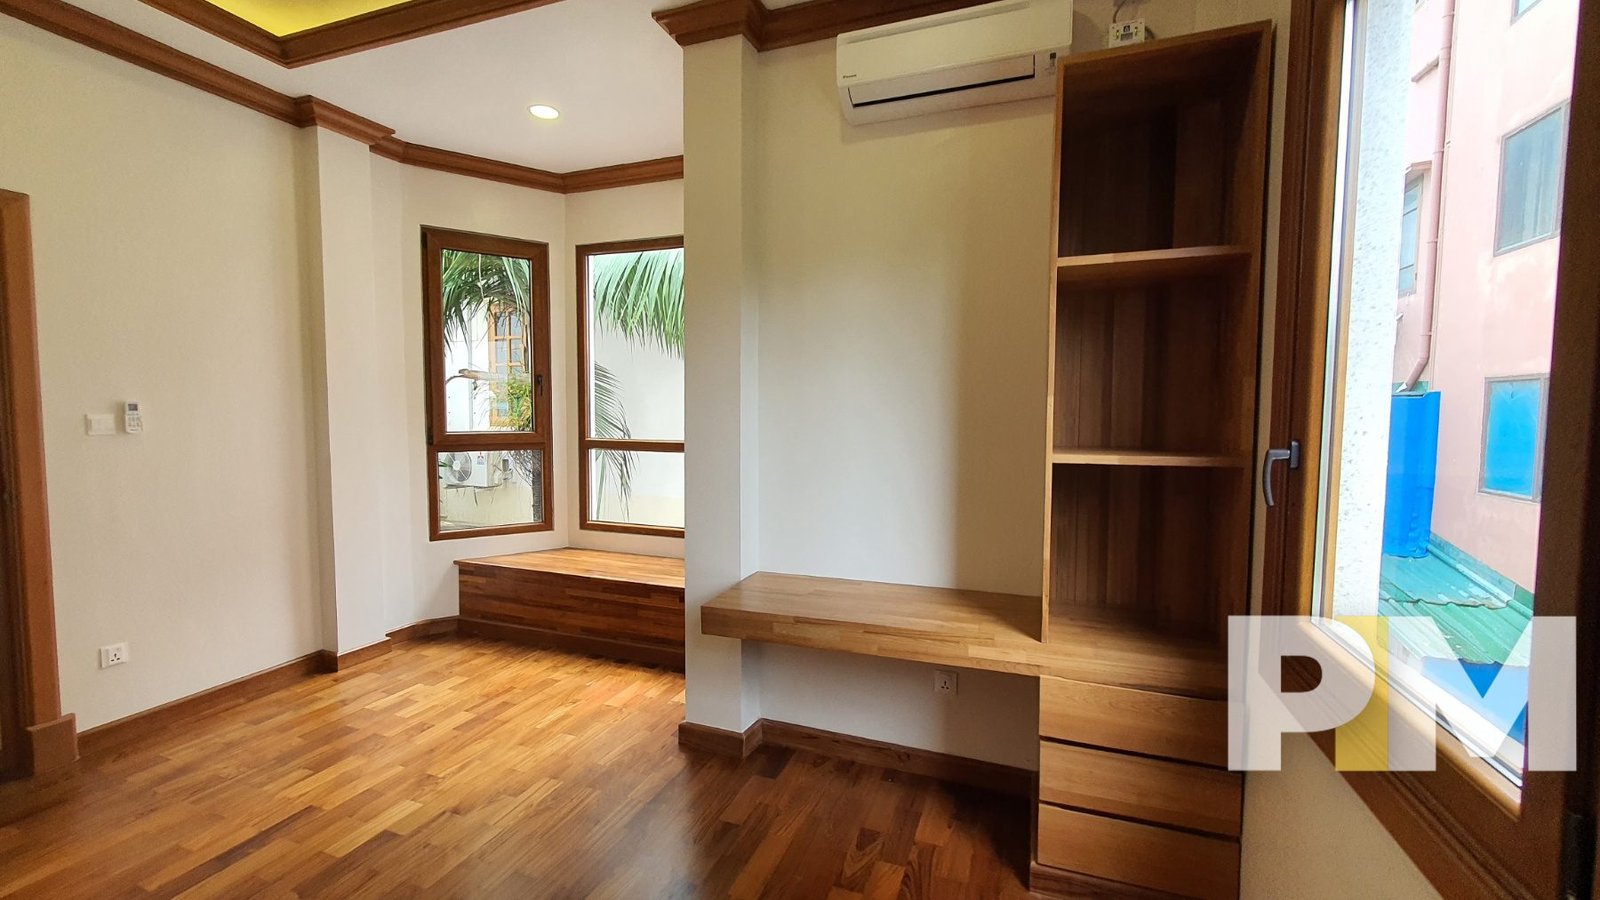 bedroom with air conditioner - Yangon Property